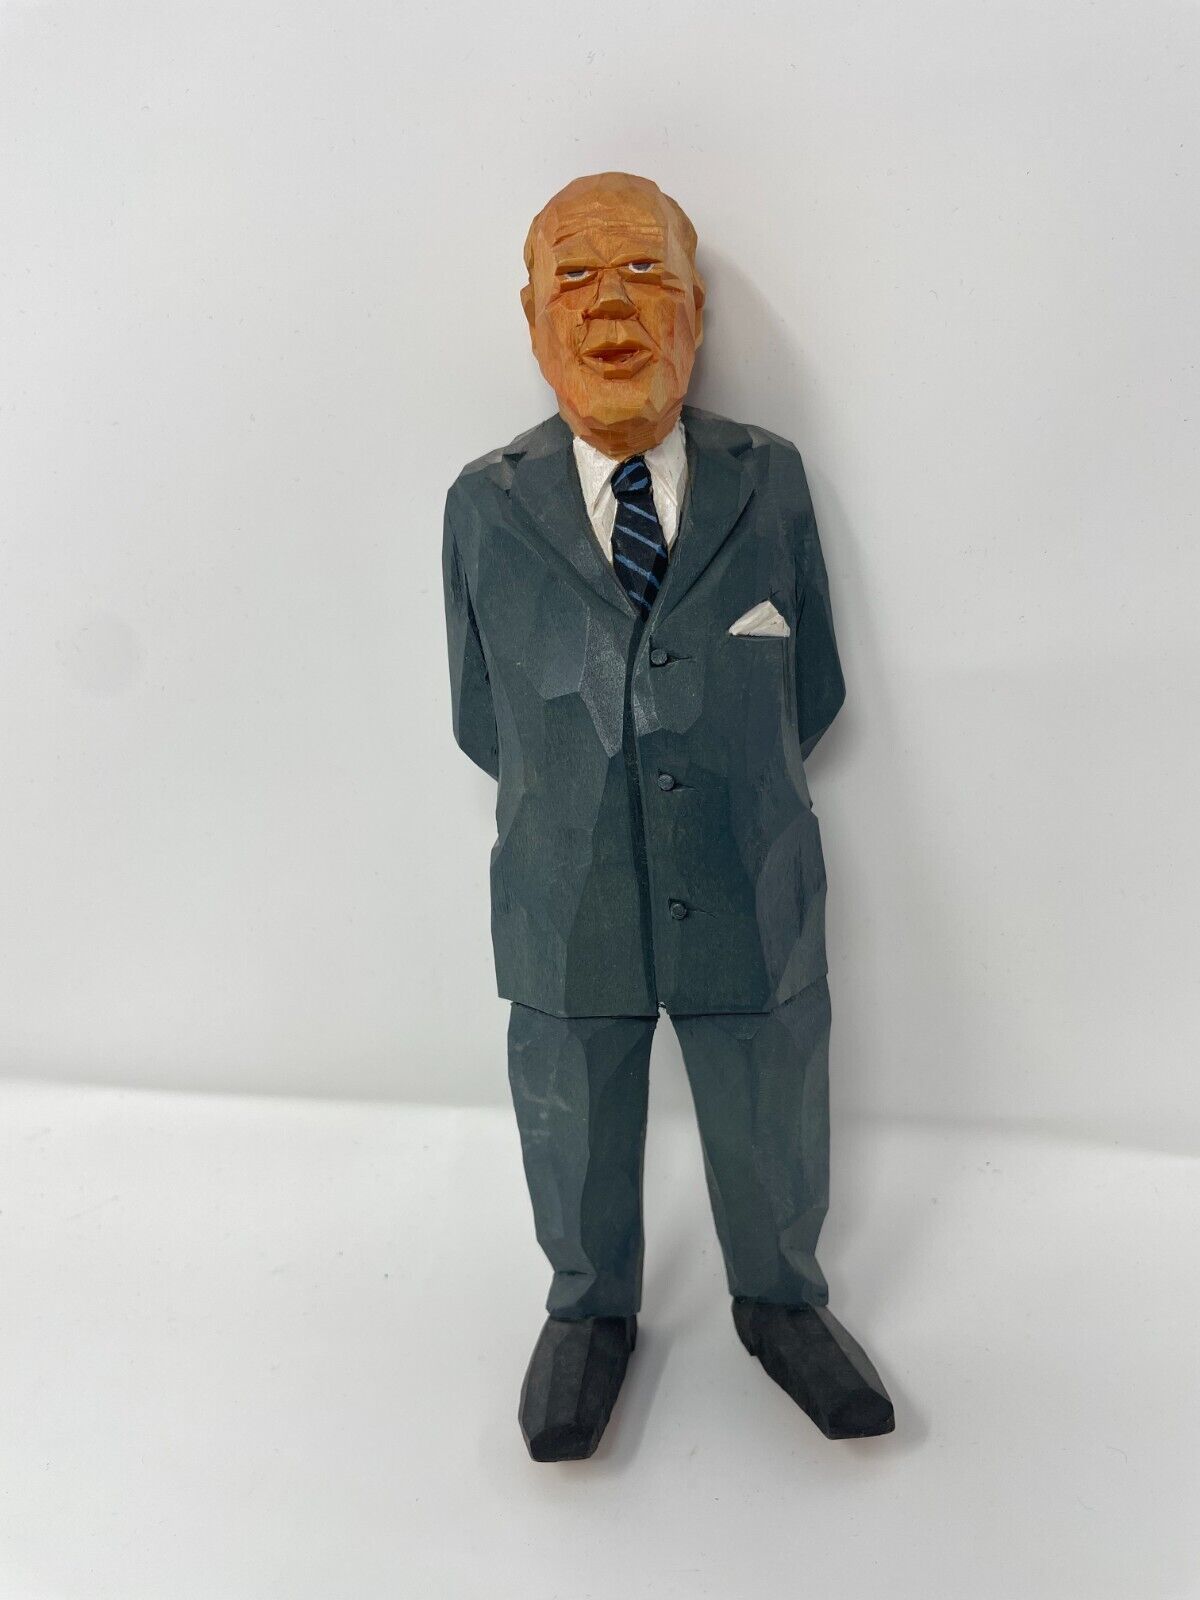 SIGNED GUNNARSSON  Hand Paint Wood Figure Presidents Of United States